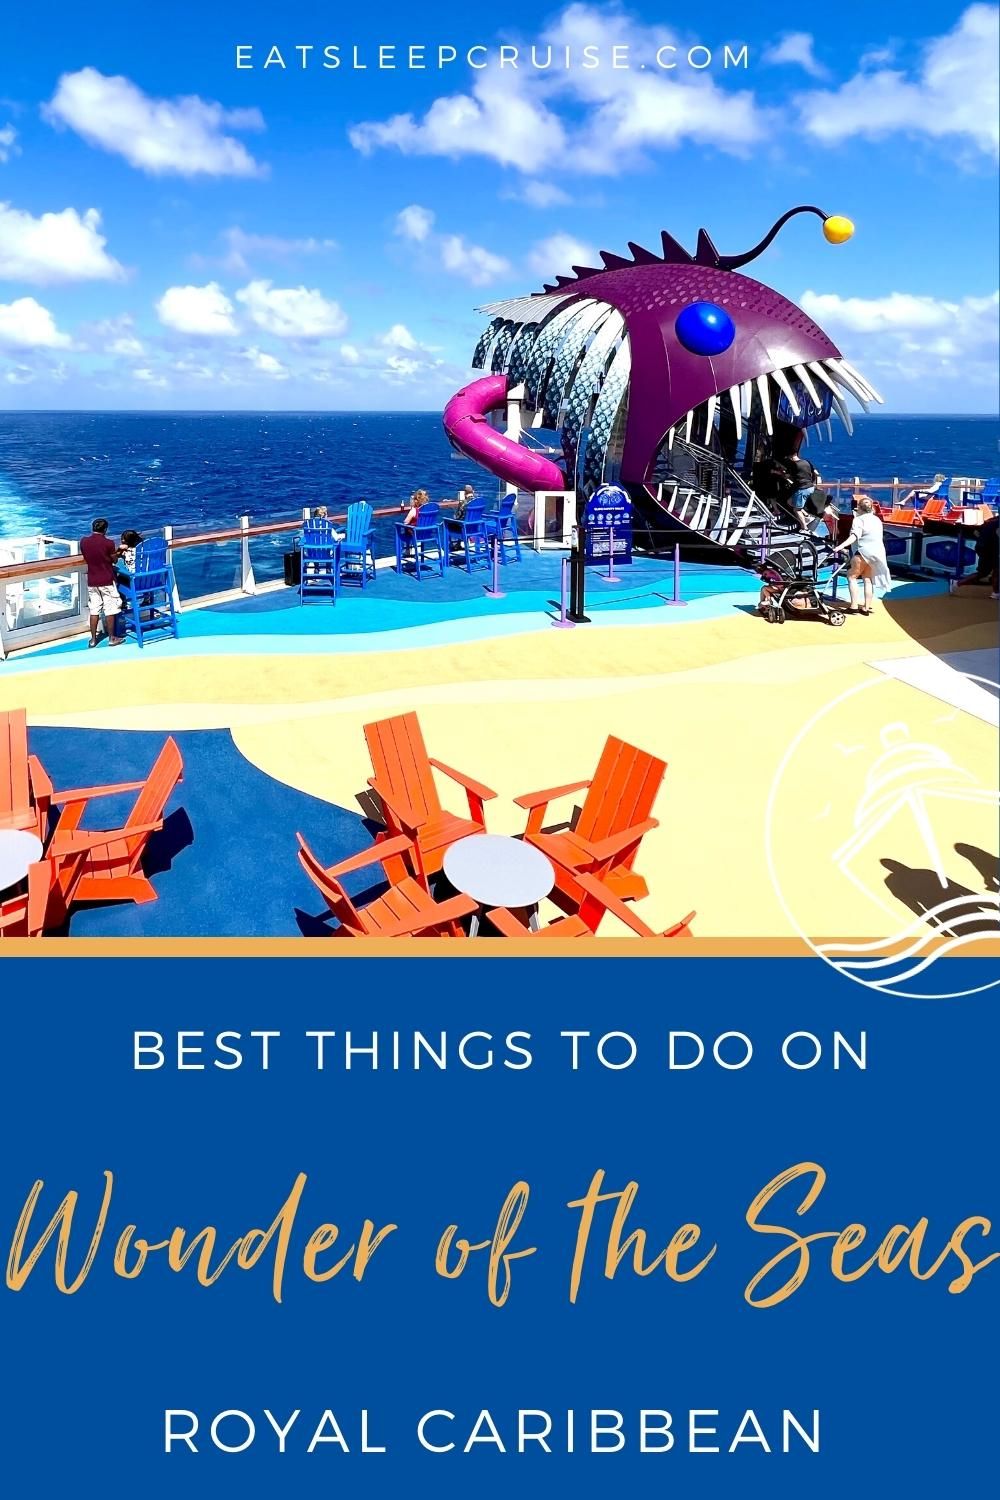 Best Things to Do on Wonder of the Seas